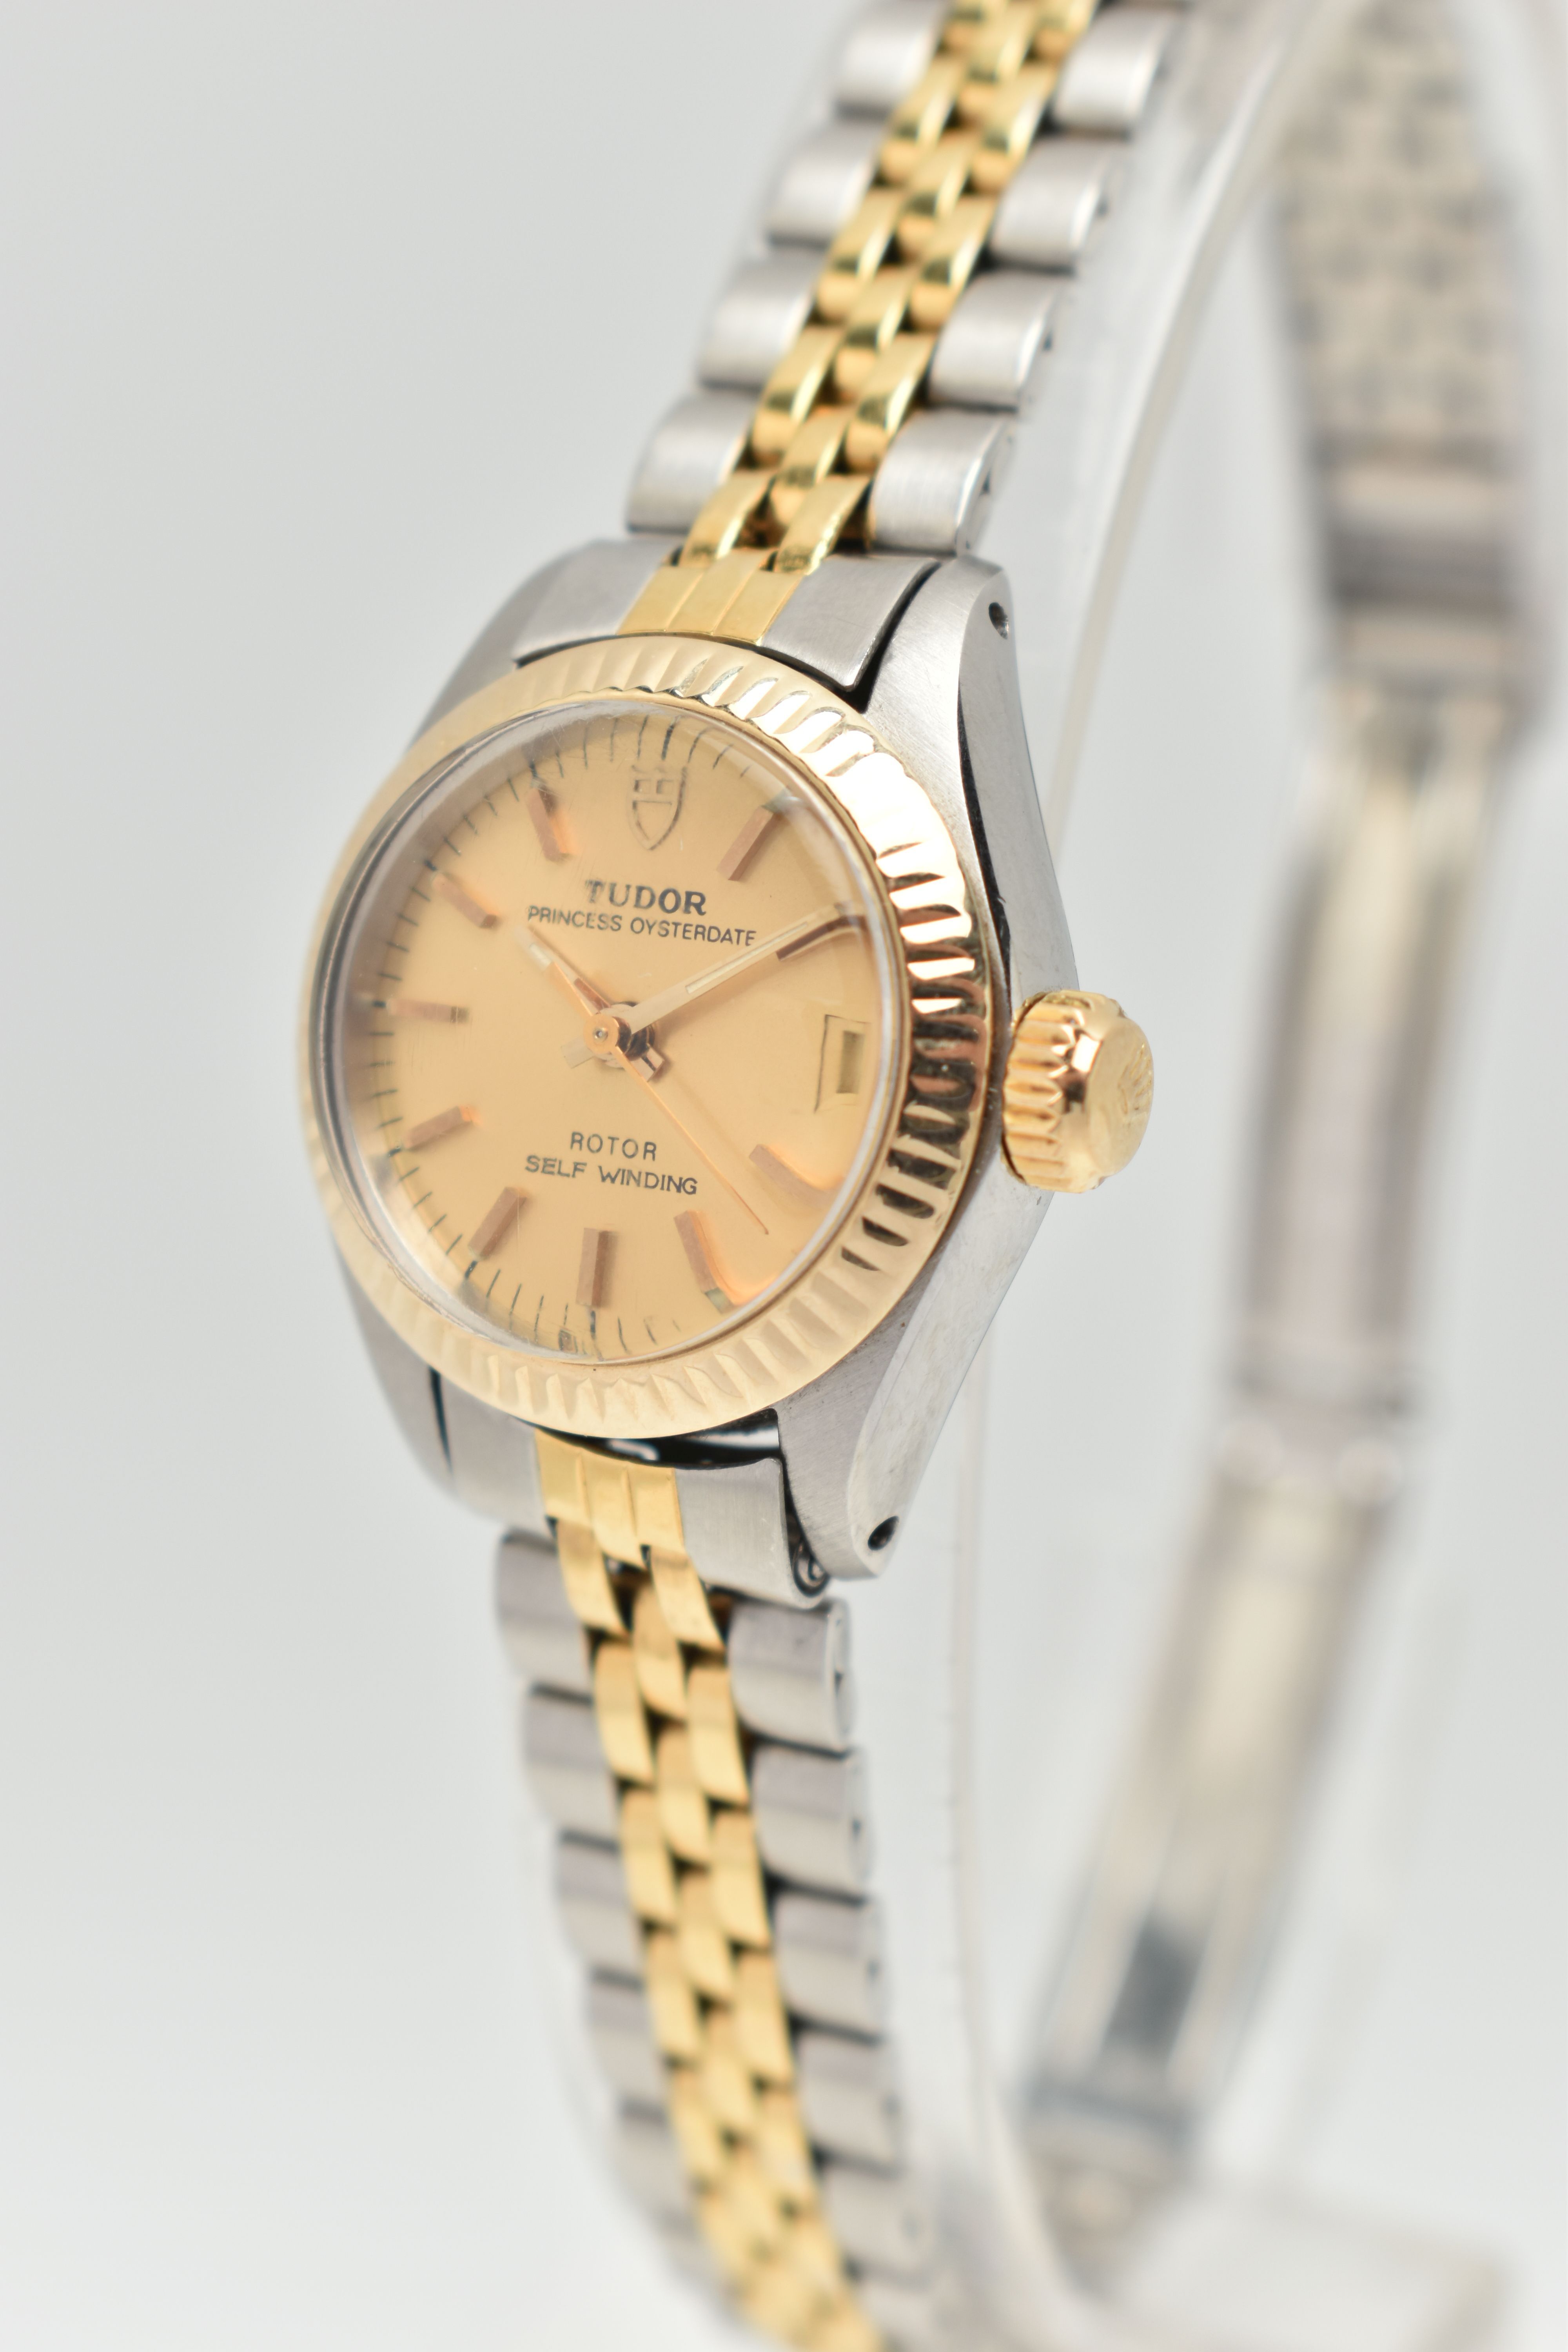 A LADYS 'TUDOR' WRISTWATCH, round gold dial signed 'Tudor Princess Oyster date, Rotor Self Winding', - Image 3 of 10